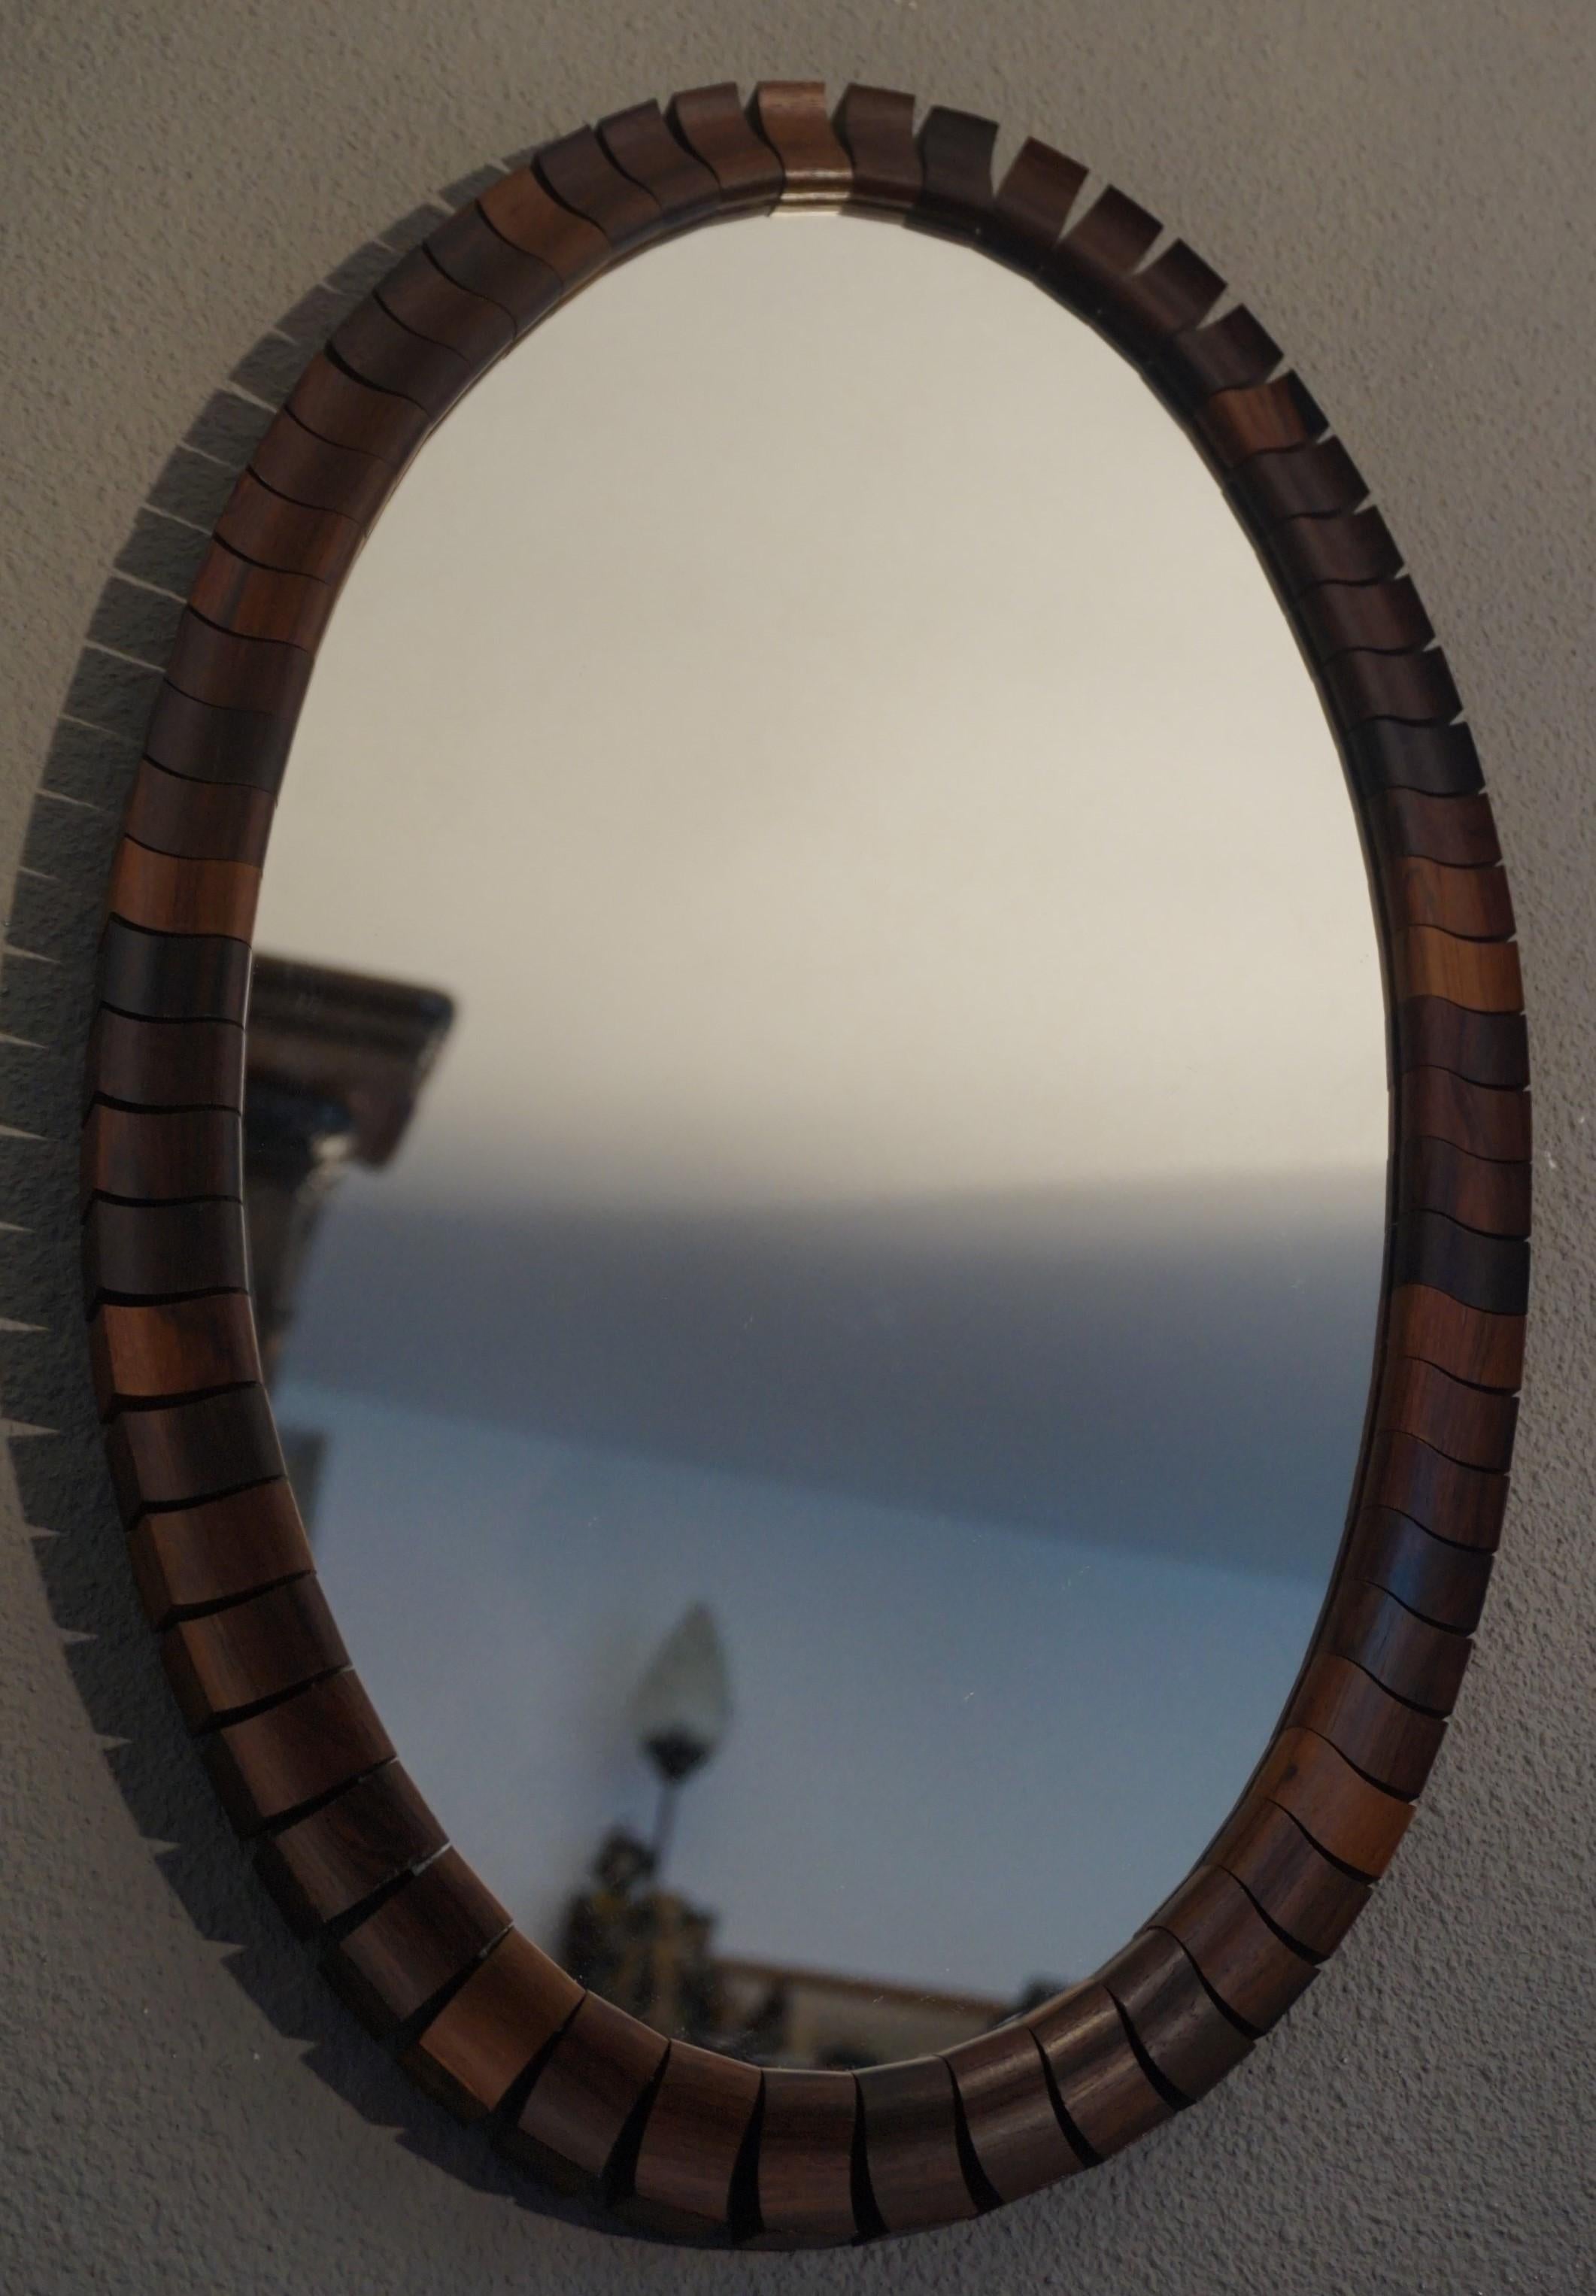 Striking Mid-Century Modern Oval Mirror in Handcrafted Geometrical Wooden Frame For Sale 4